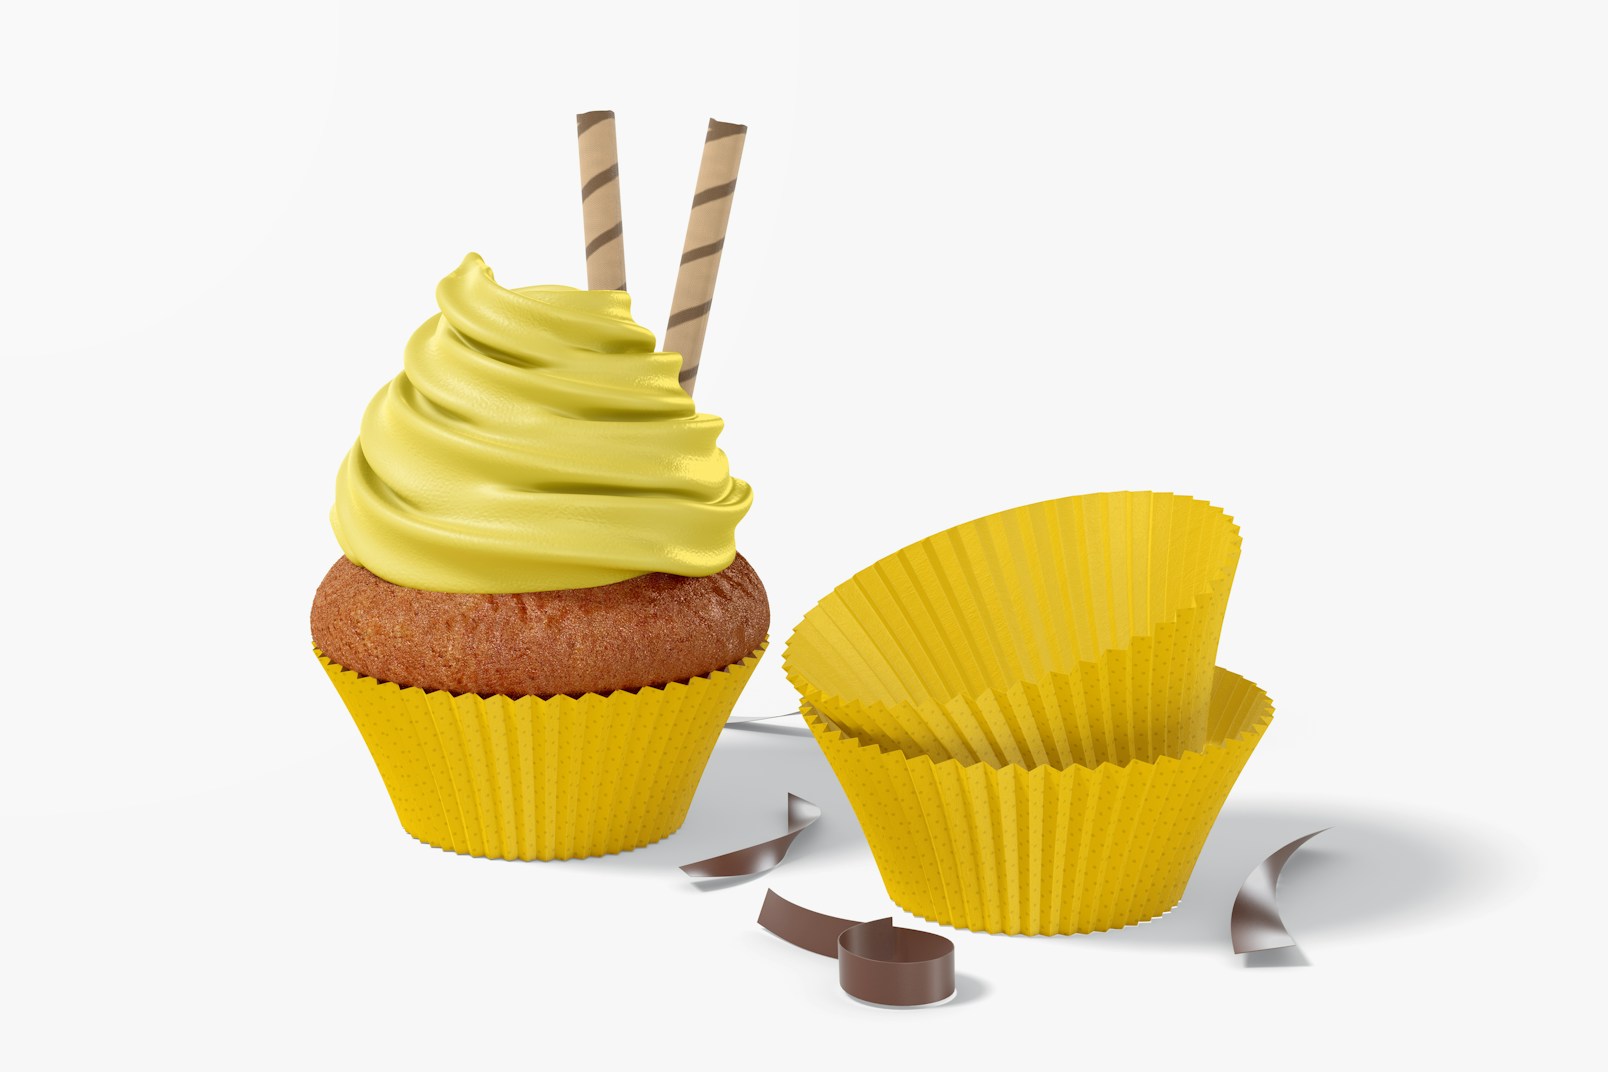 Cupcakes with Paper Baking Cup Mockup, Perspective